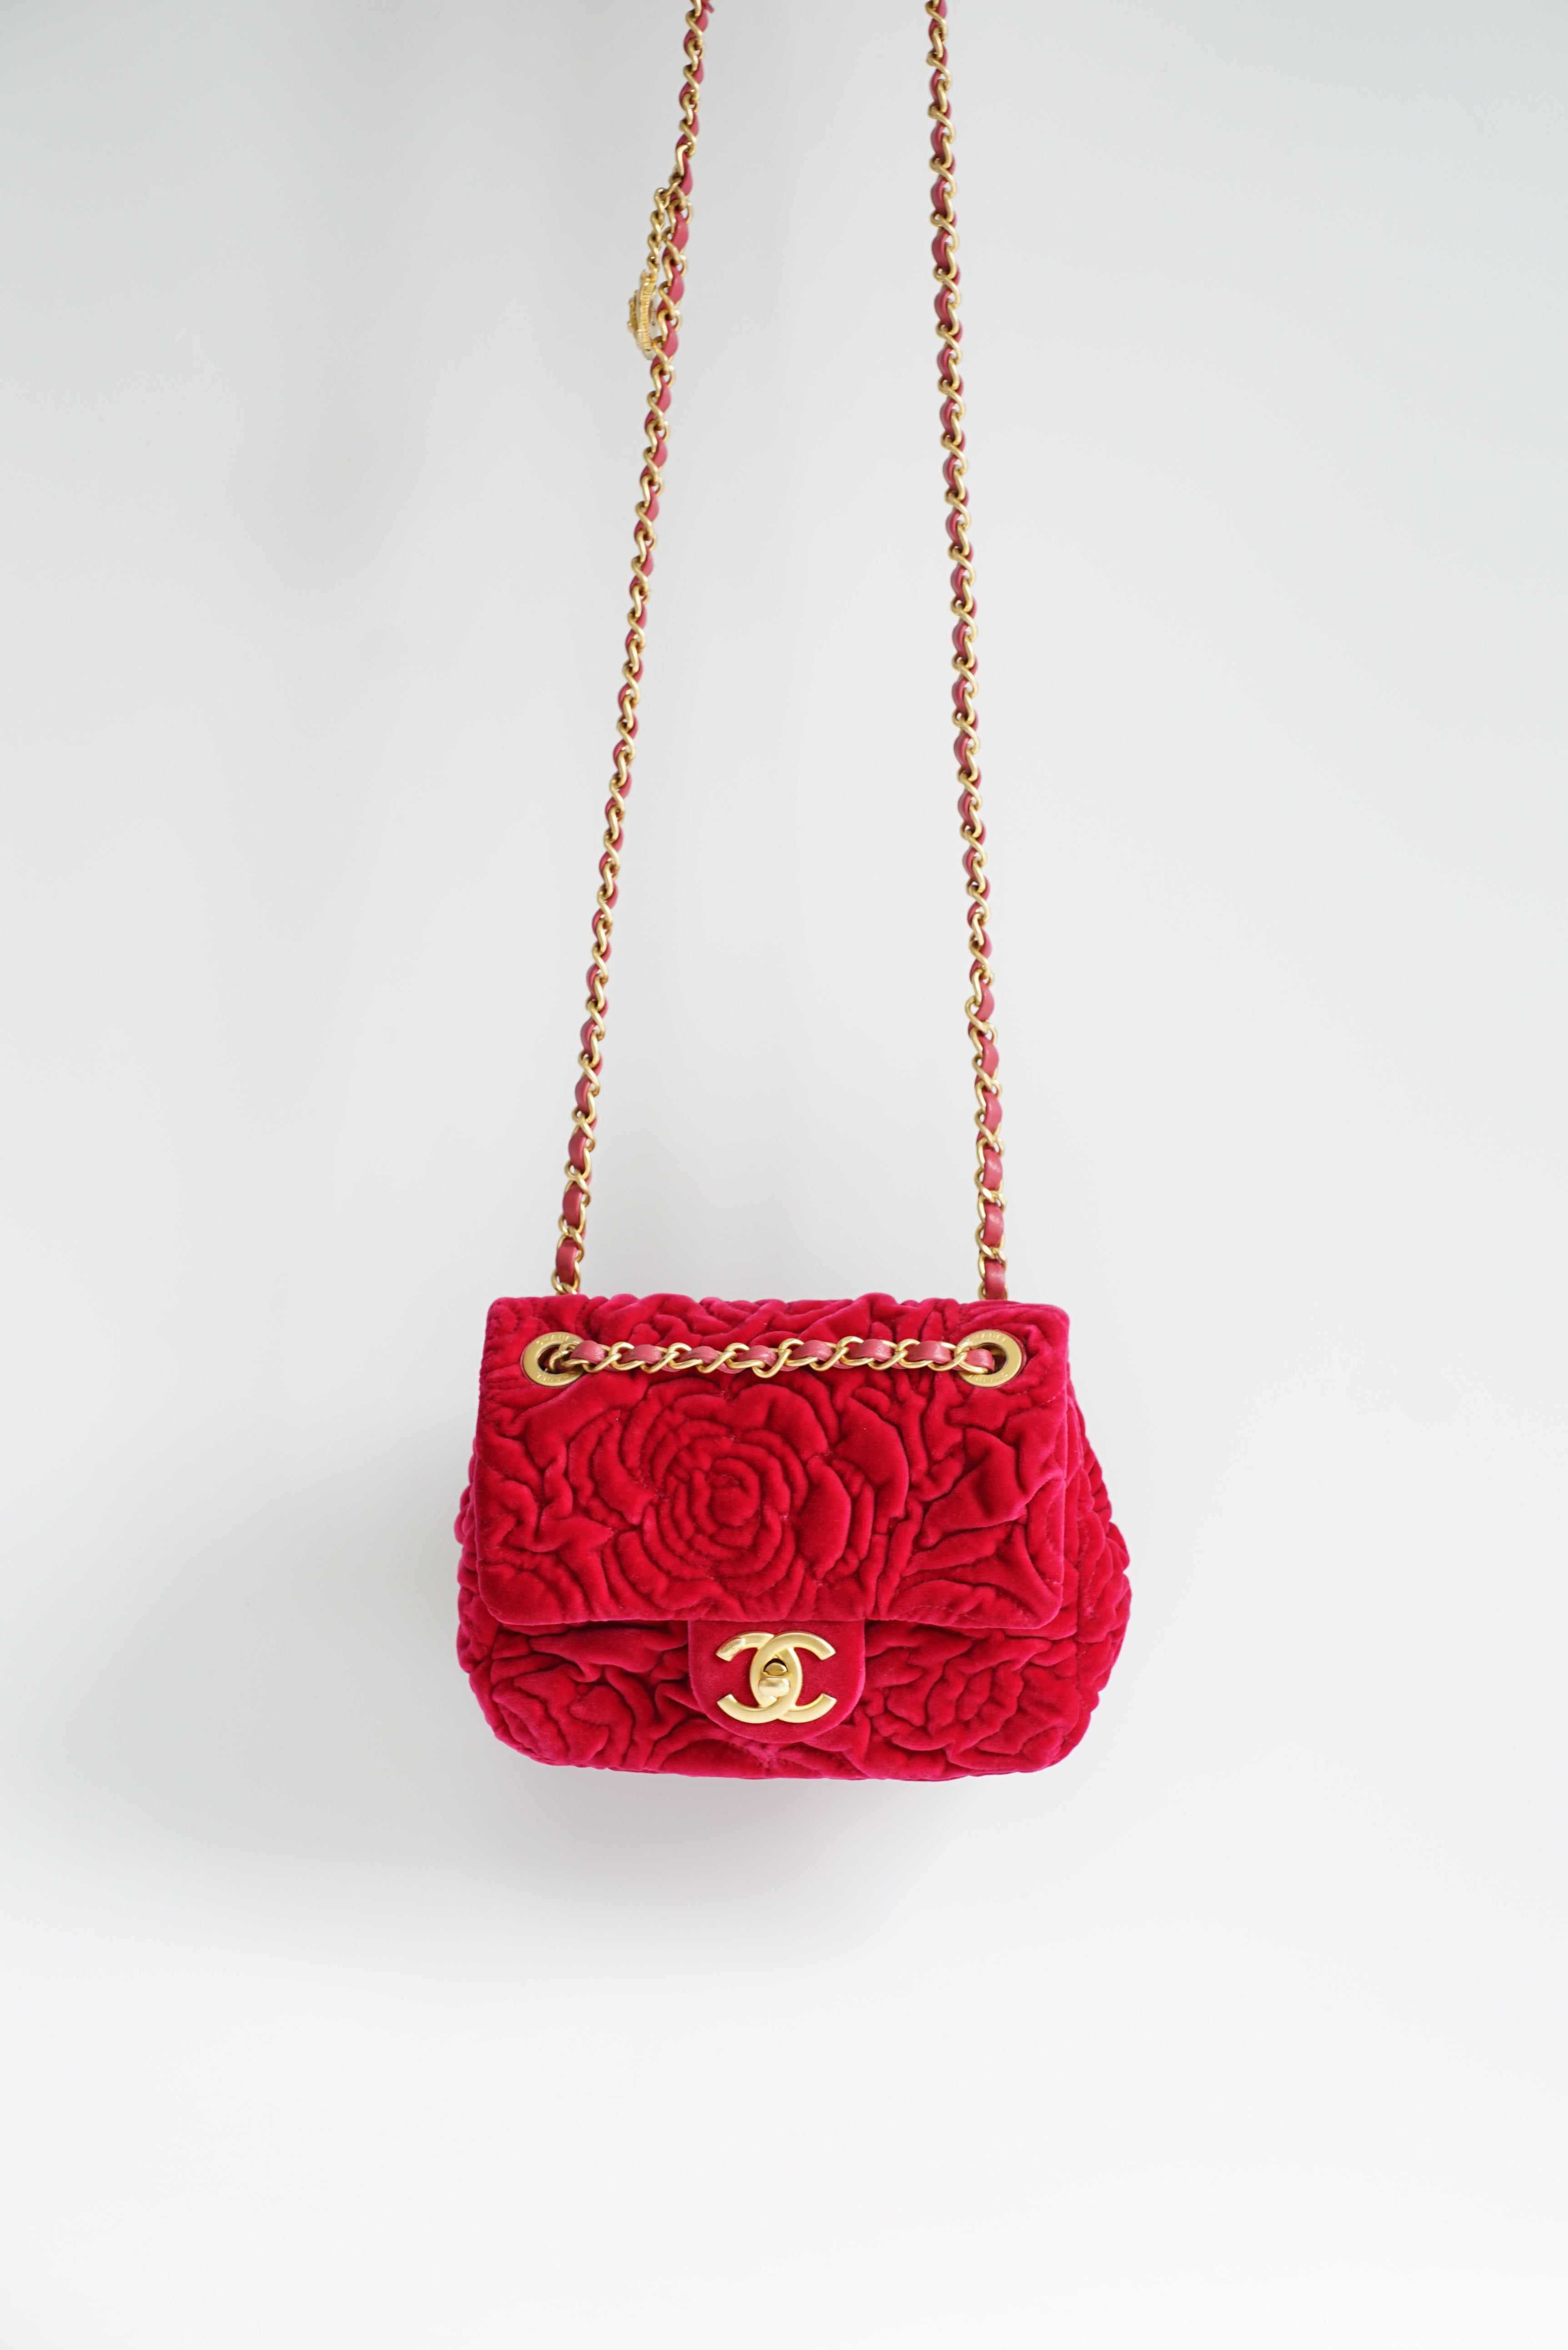 Chanel Camellia Velvet Mini Square Single Flap and Aged Gold Hardware (Microchip)